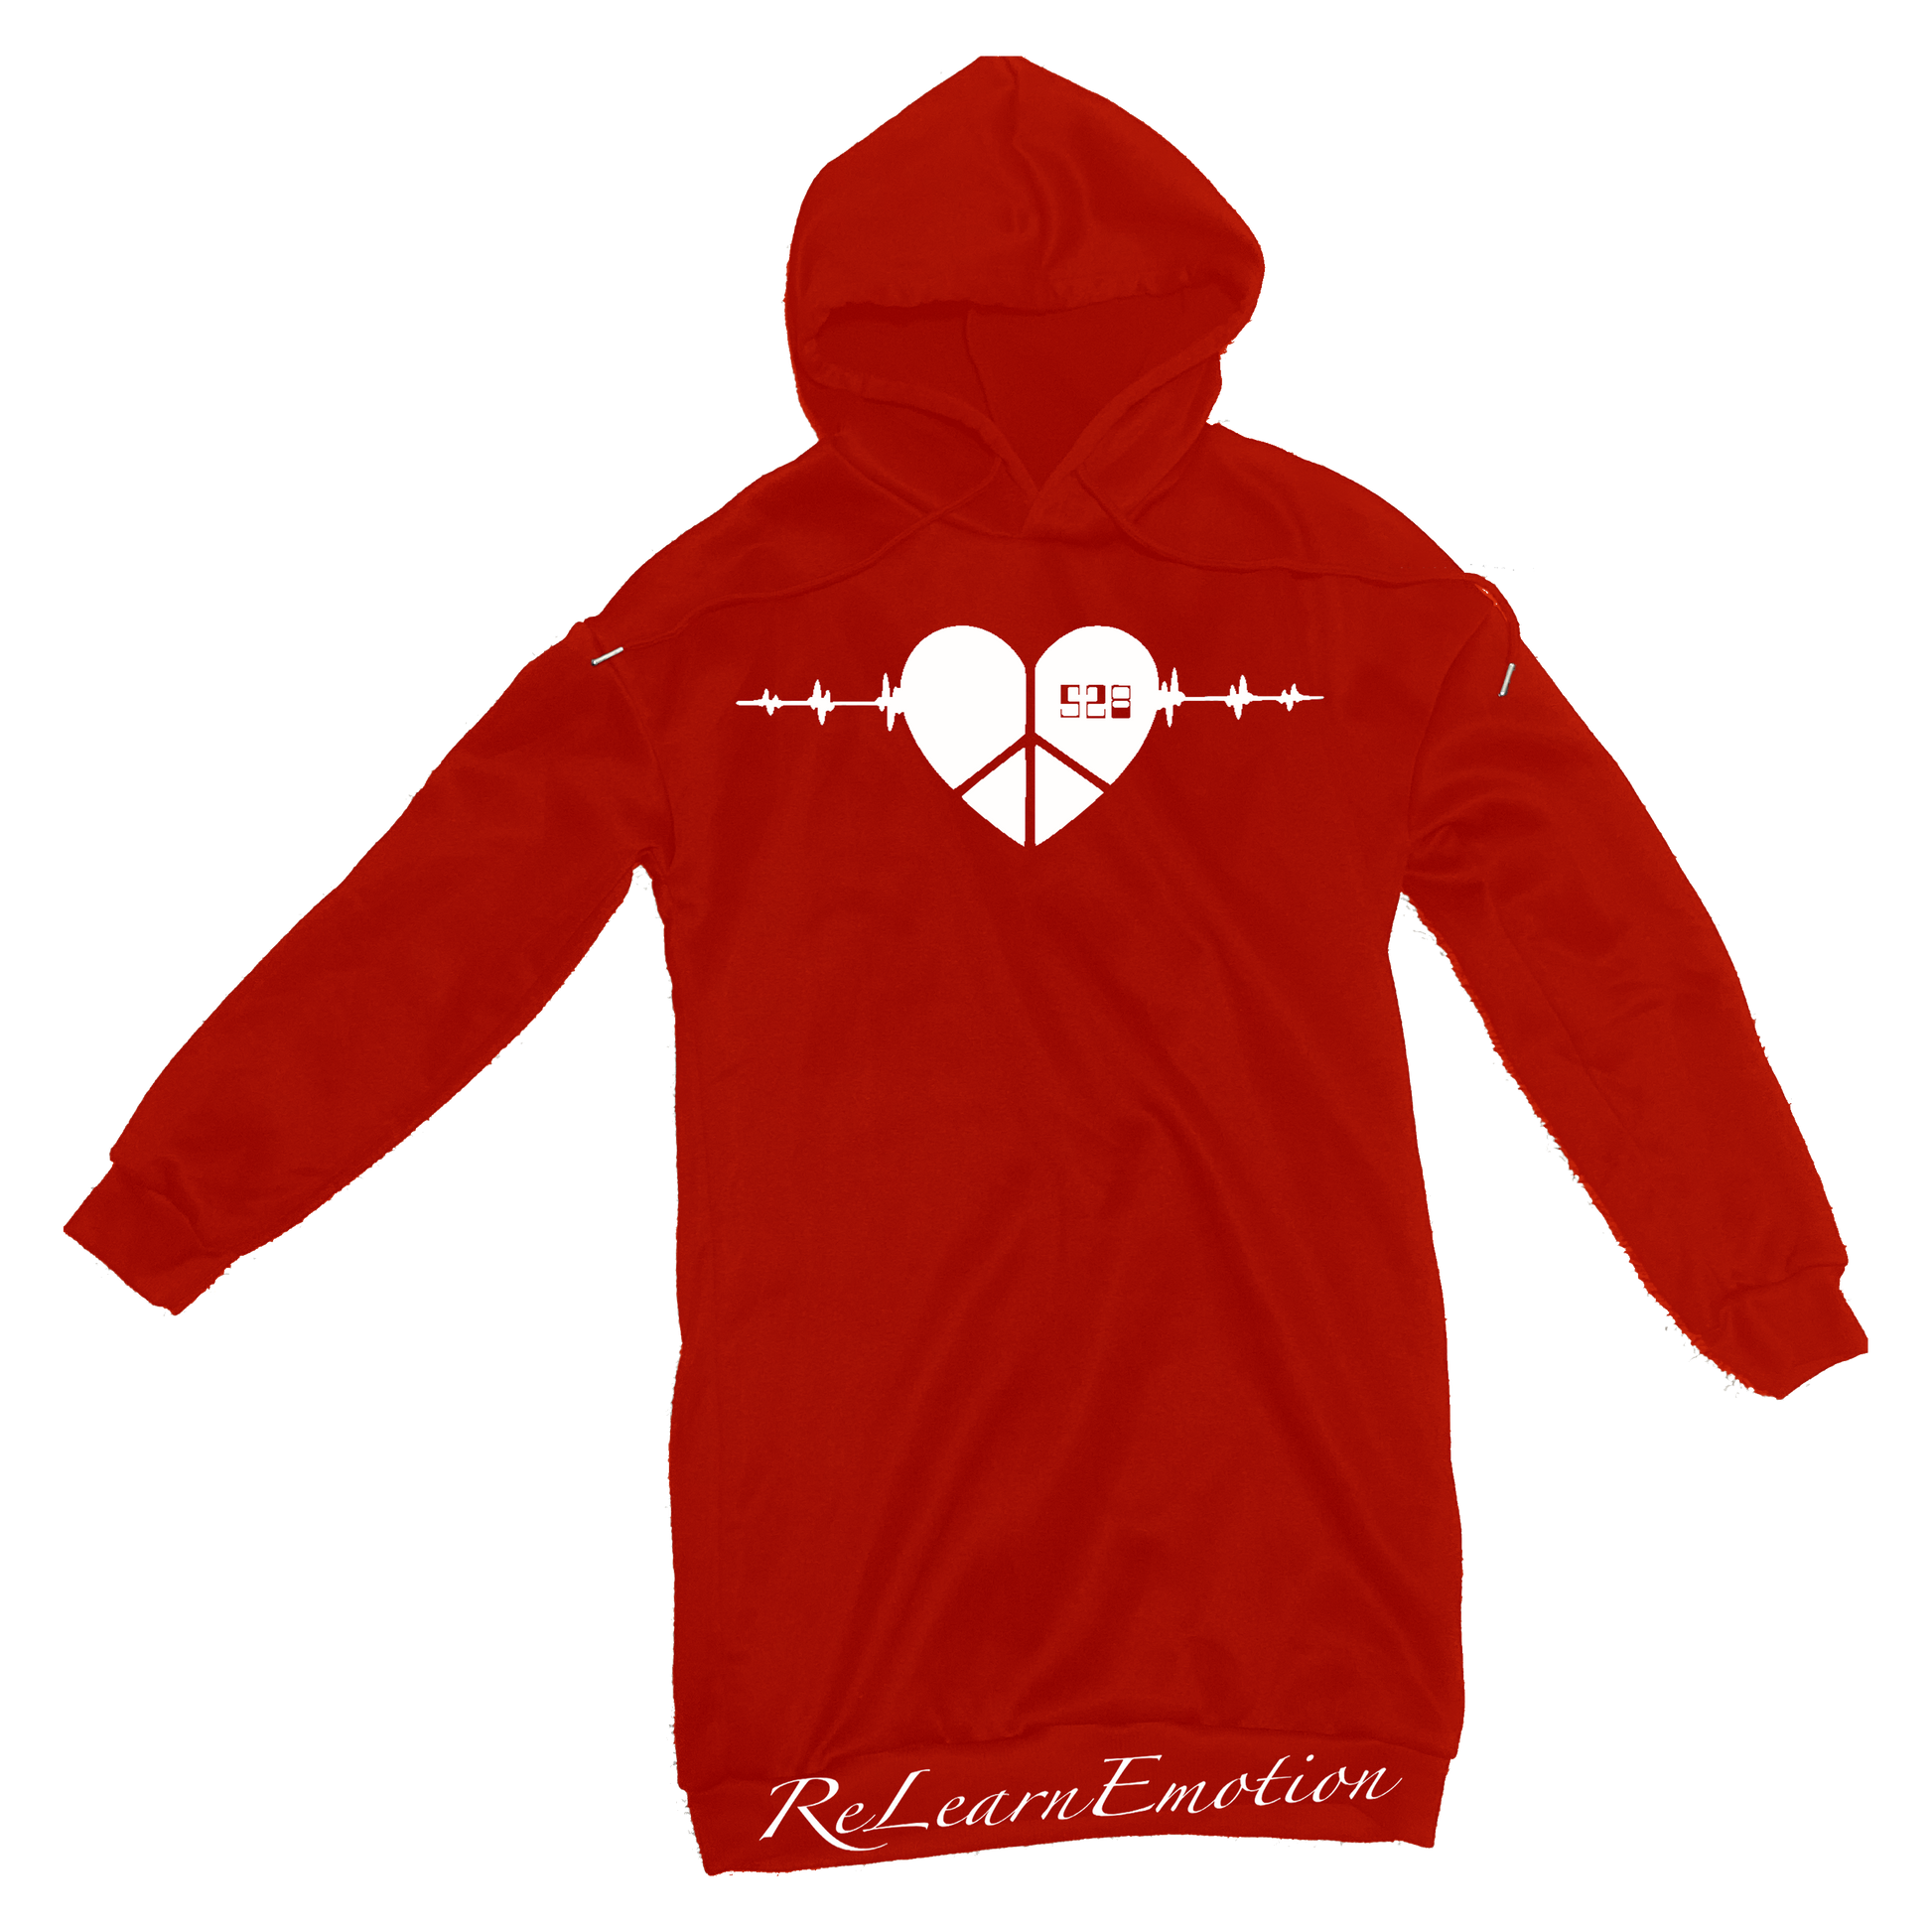 Shiny red long sleeve GSMUV hoodie dress with white 528 Alignmix Relearn Emotion logo with a heart and peace and love sign inside of the heart with volume frequencies coming from the sides of the heart.